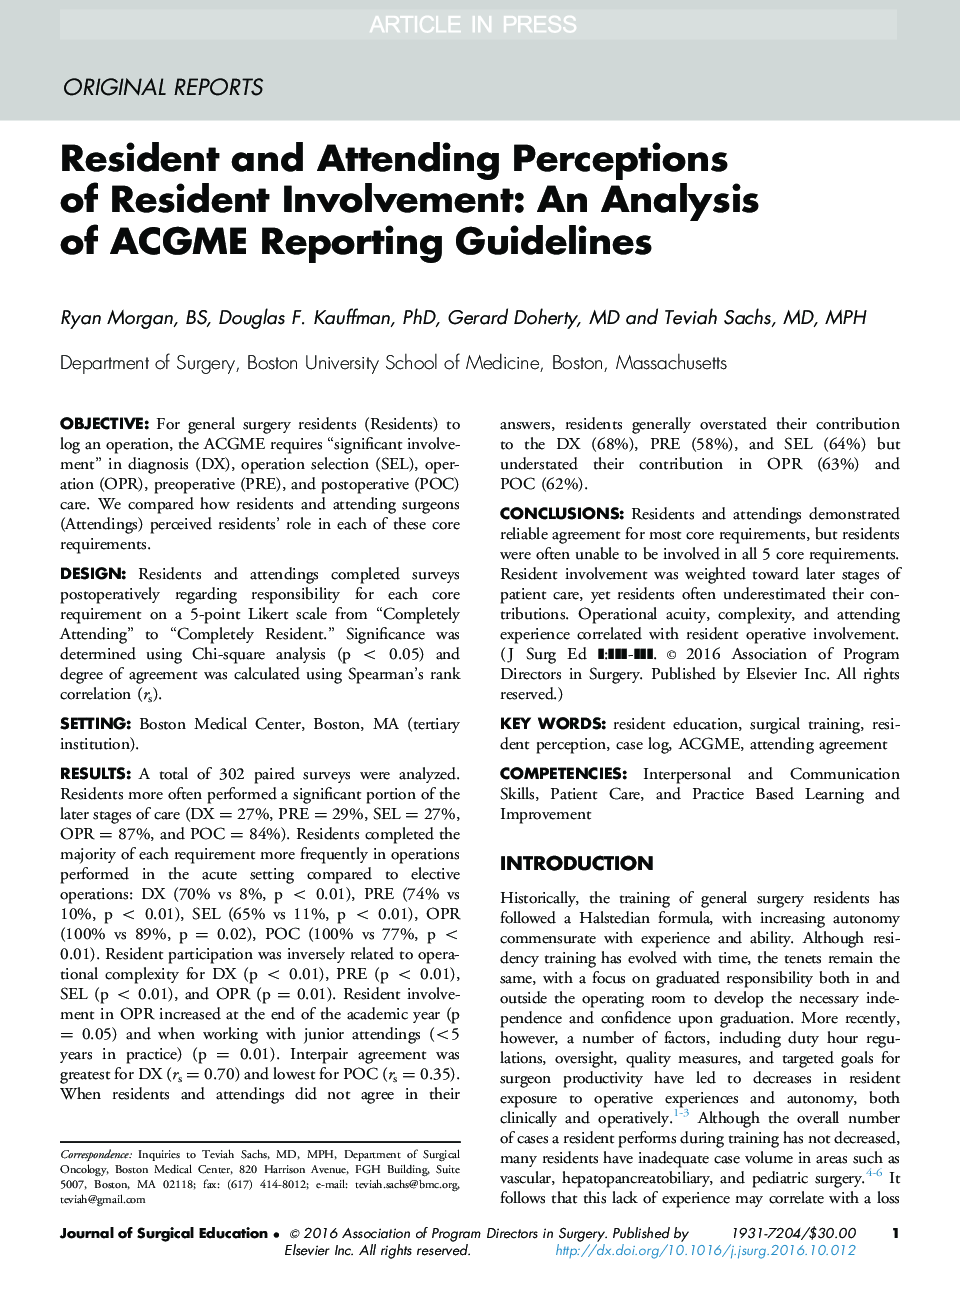 Resident and Attending Perceptions of Resident Involvement: An Analysis of ACGME Reporting Guidelines